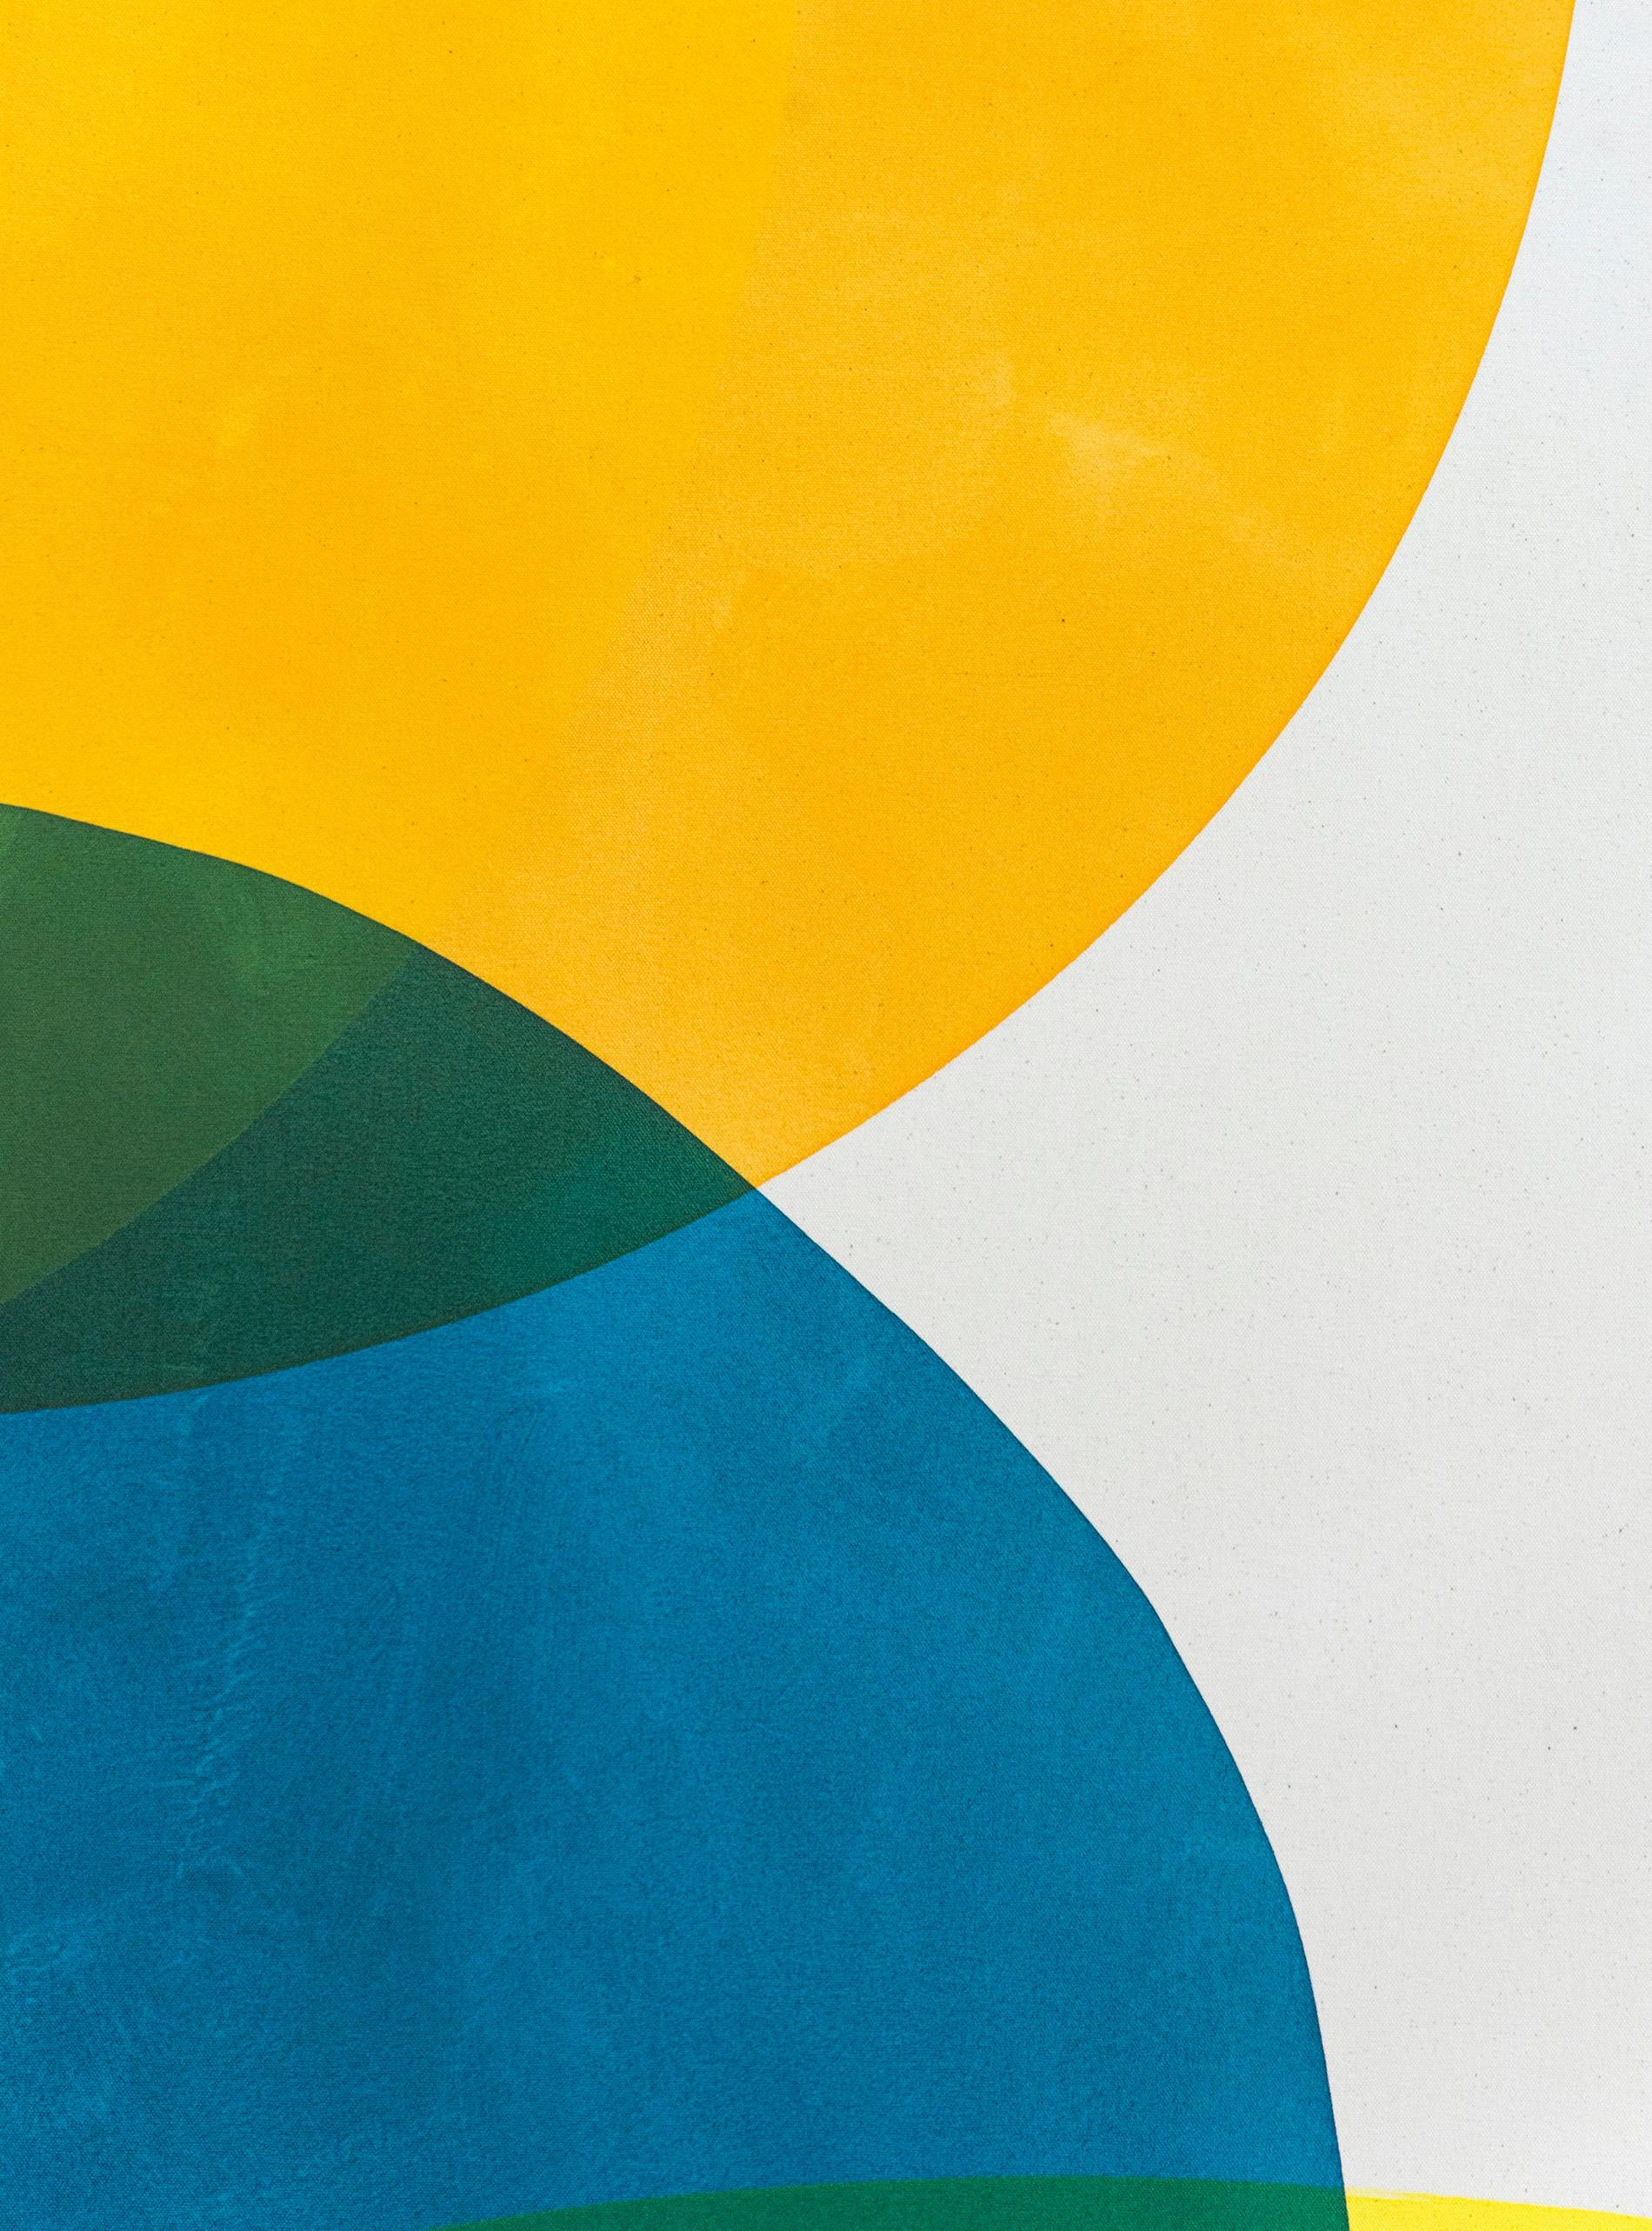 2 Yellow Suns - Bright circular shapes of blue, yellow, red and magenta  - Contemporary Painting by Aron Hill